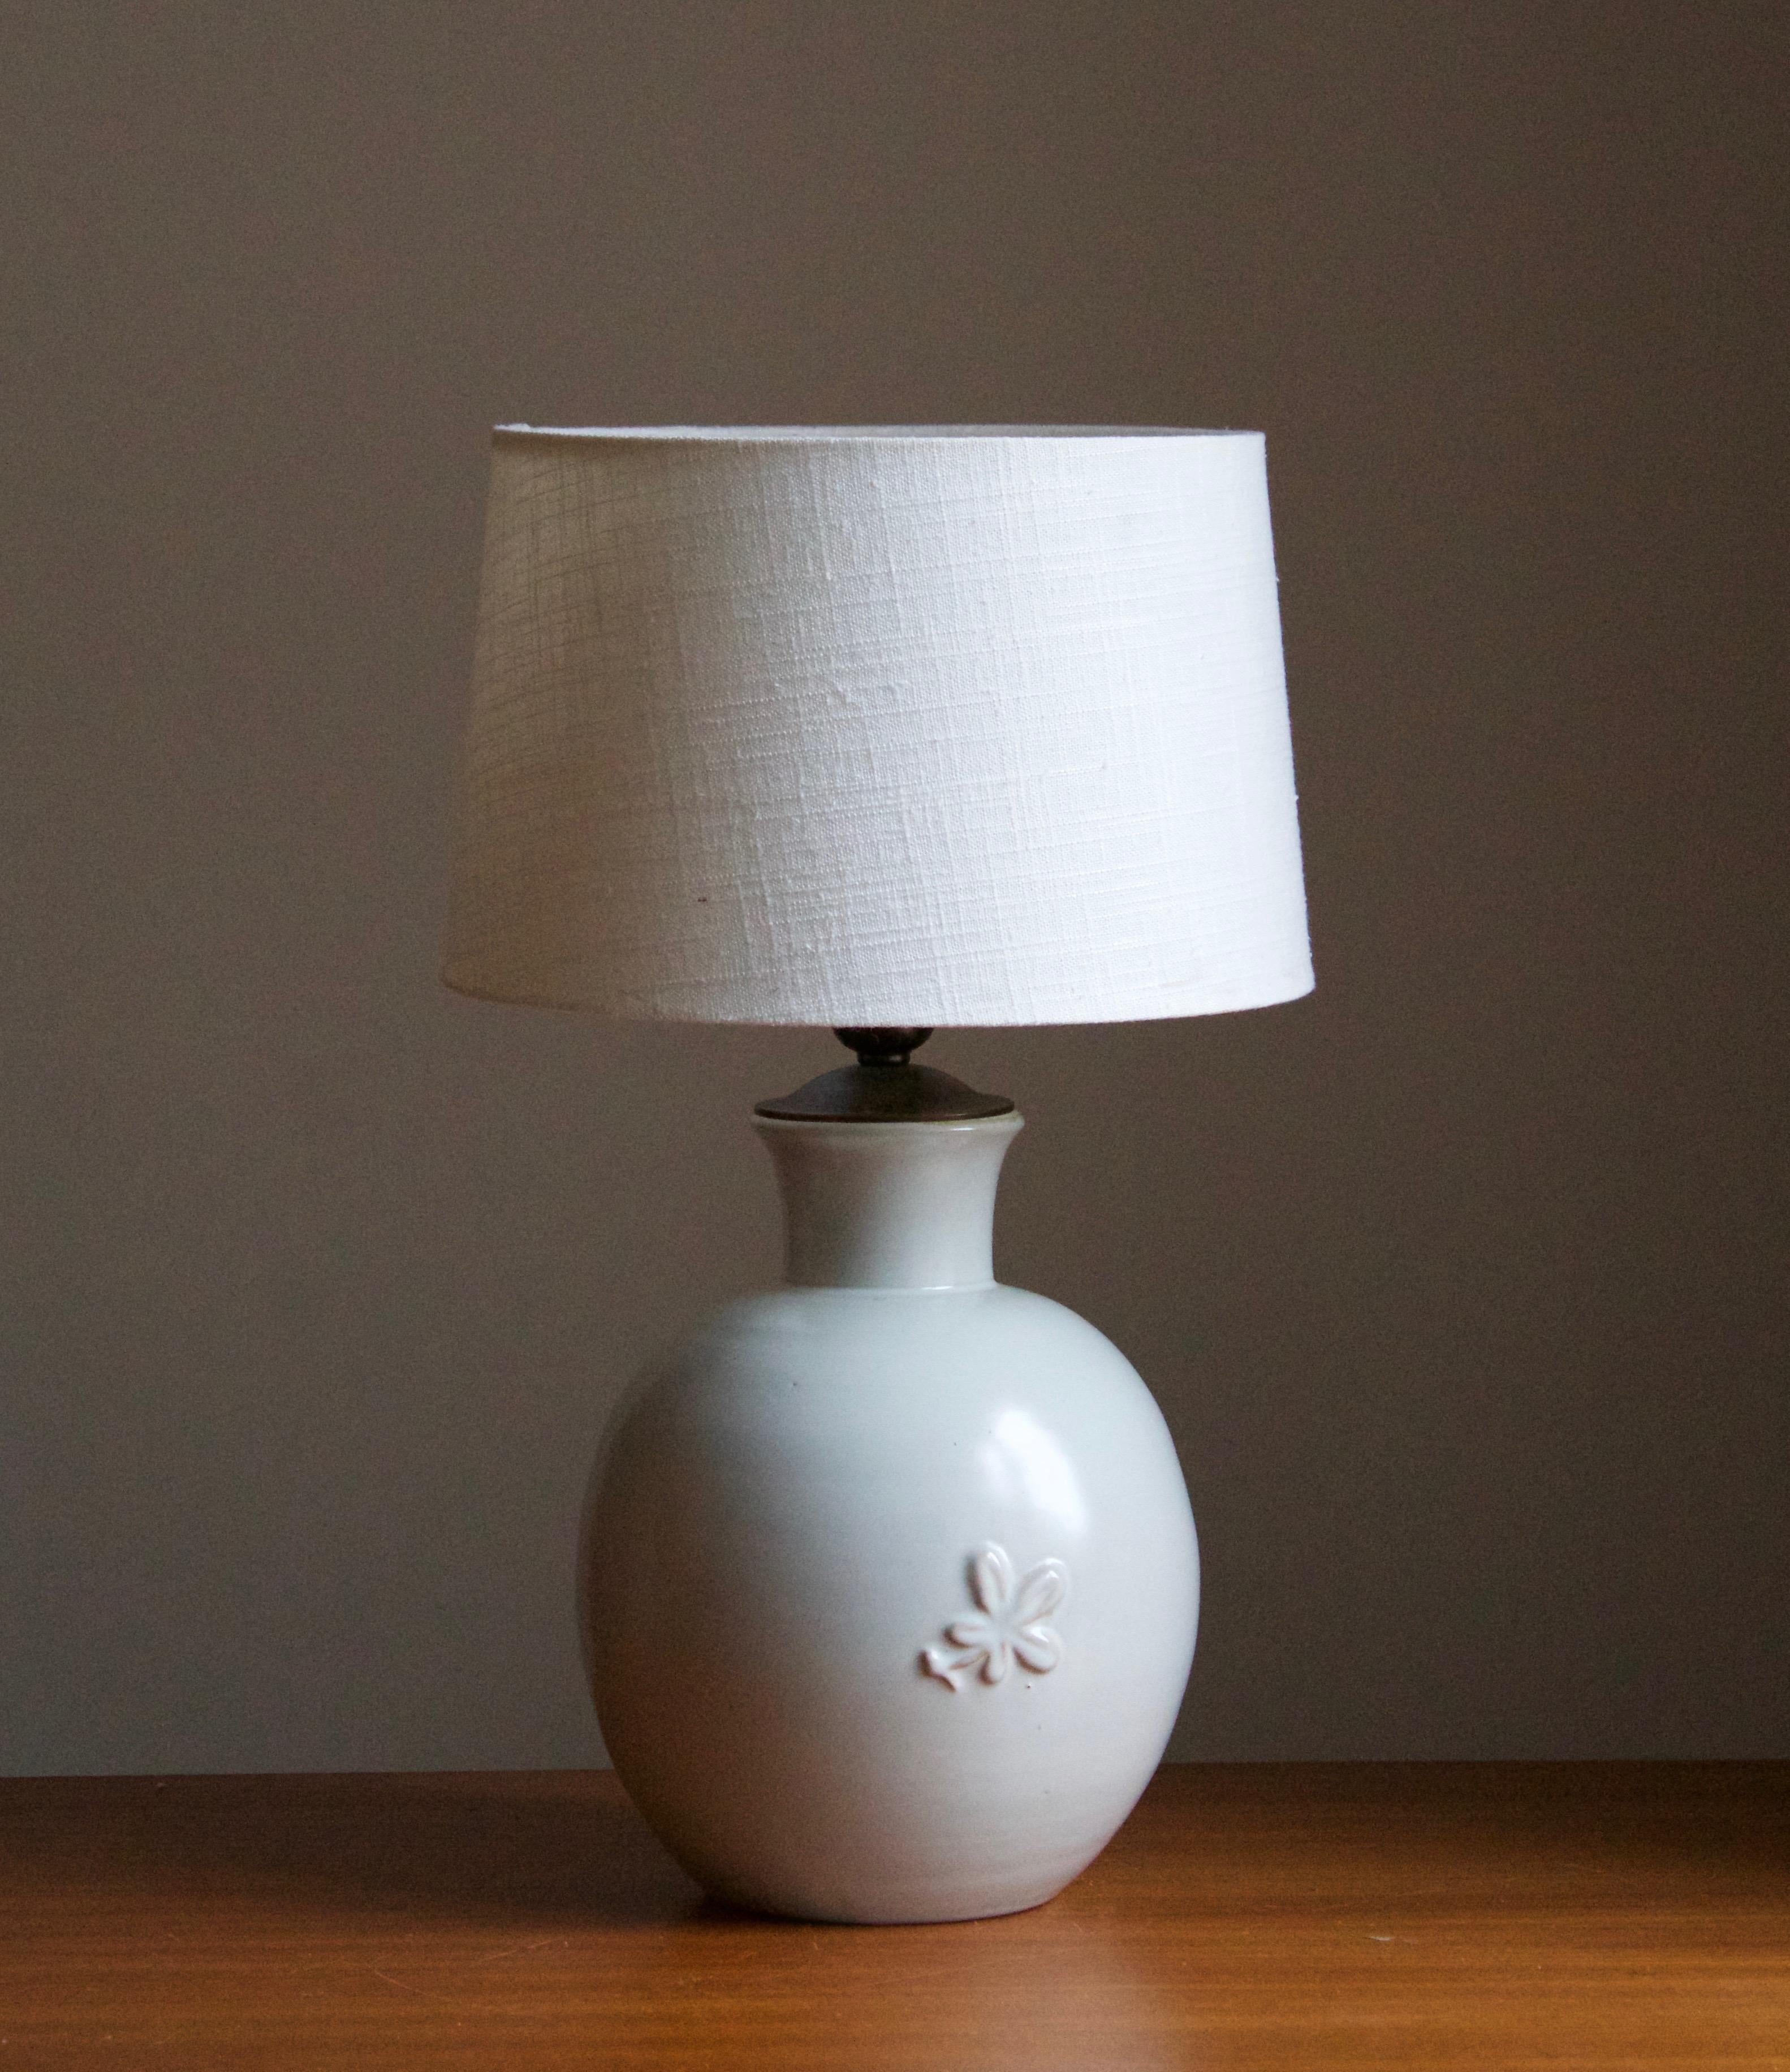 A large modernist table lamp design attributed to Jerk Werkmäster. Produced by Nittsjö, Sweden, 1930s. Stamped.

Sold without lampshade. Stated dimensions exclude the lampshade.

Glaze features a white color.

Other designers of the period include